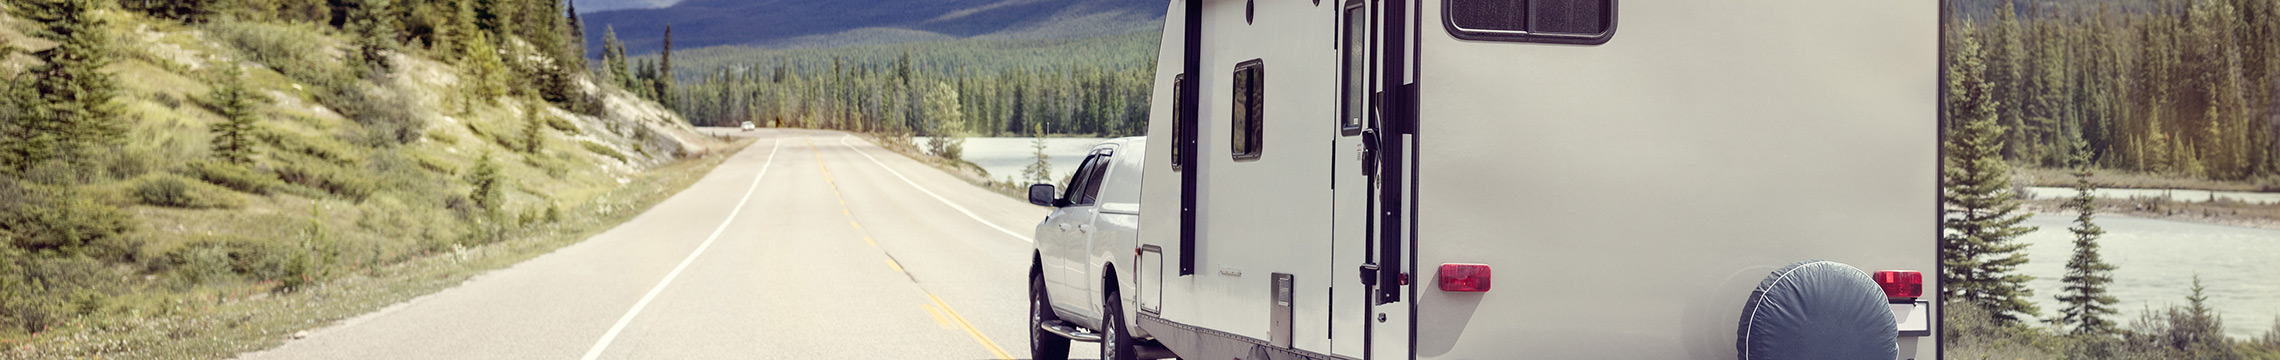 White travel trailer being towed through scenic landscape by white pickup truck